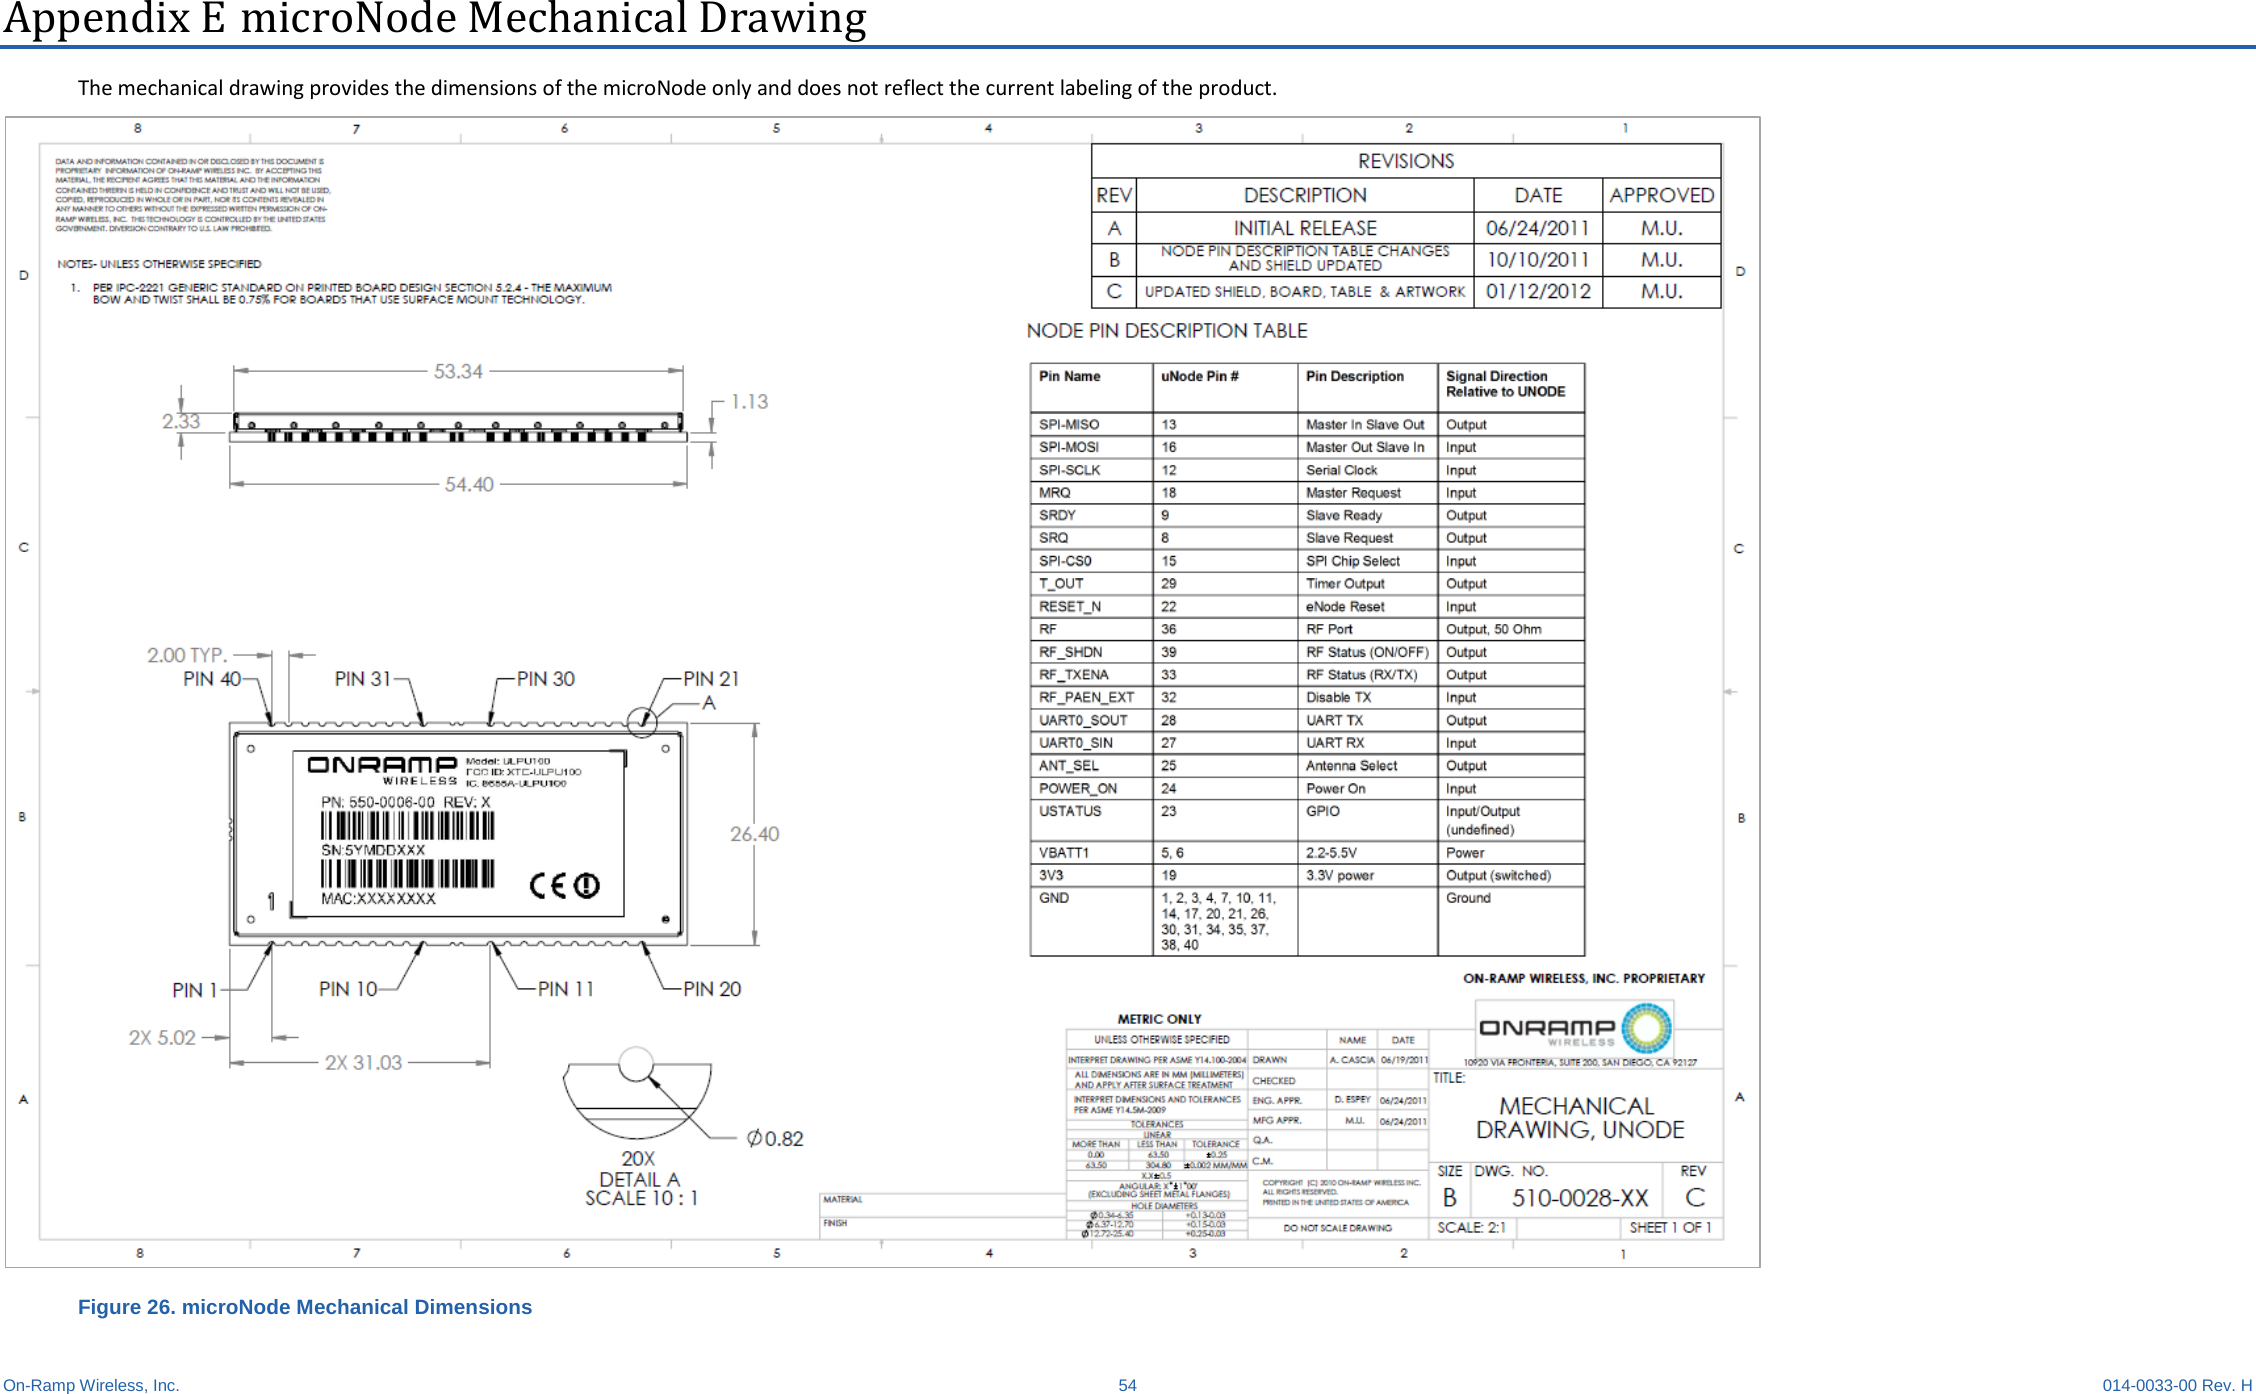  On-Ramp Wireless, Inc. 54 014-0033-00 Rev. H Appendix E microNode Mechanical Drawing The mechanical drawing provides the dimensions of the microNode only and does not reflect the current labeling of the product.  Figure 26. microNode Mechanical Dimensions  